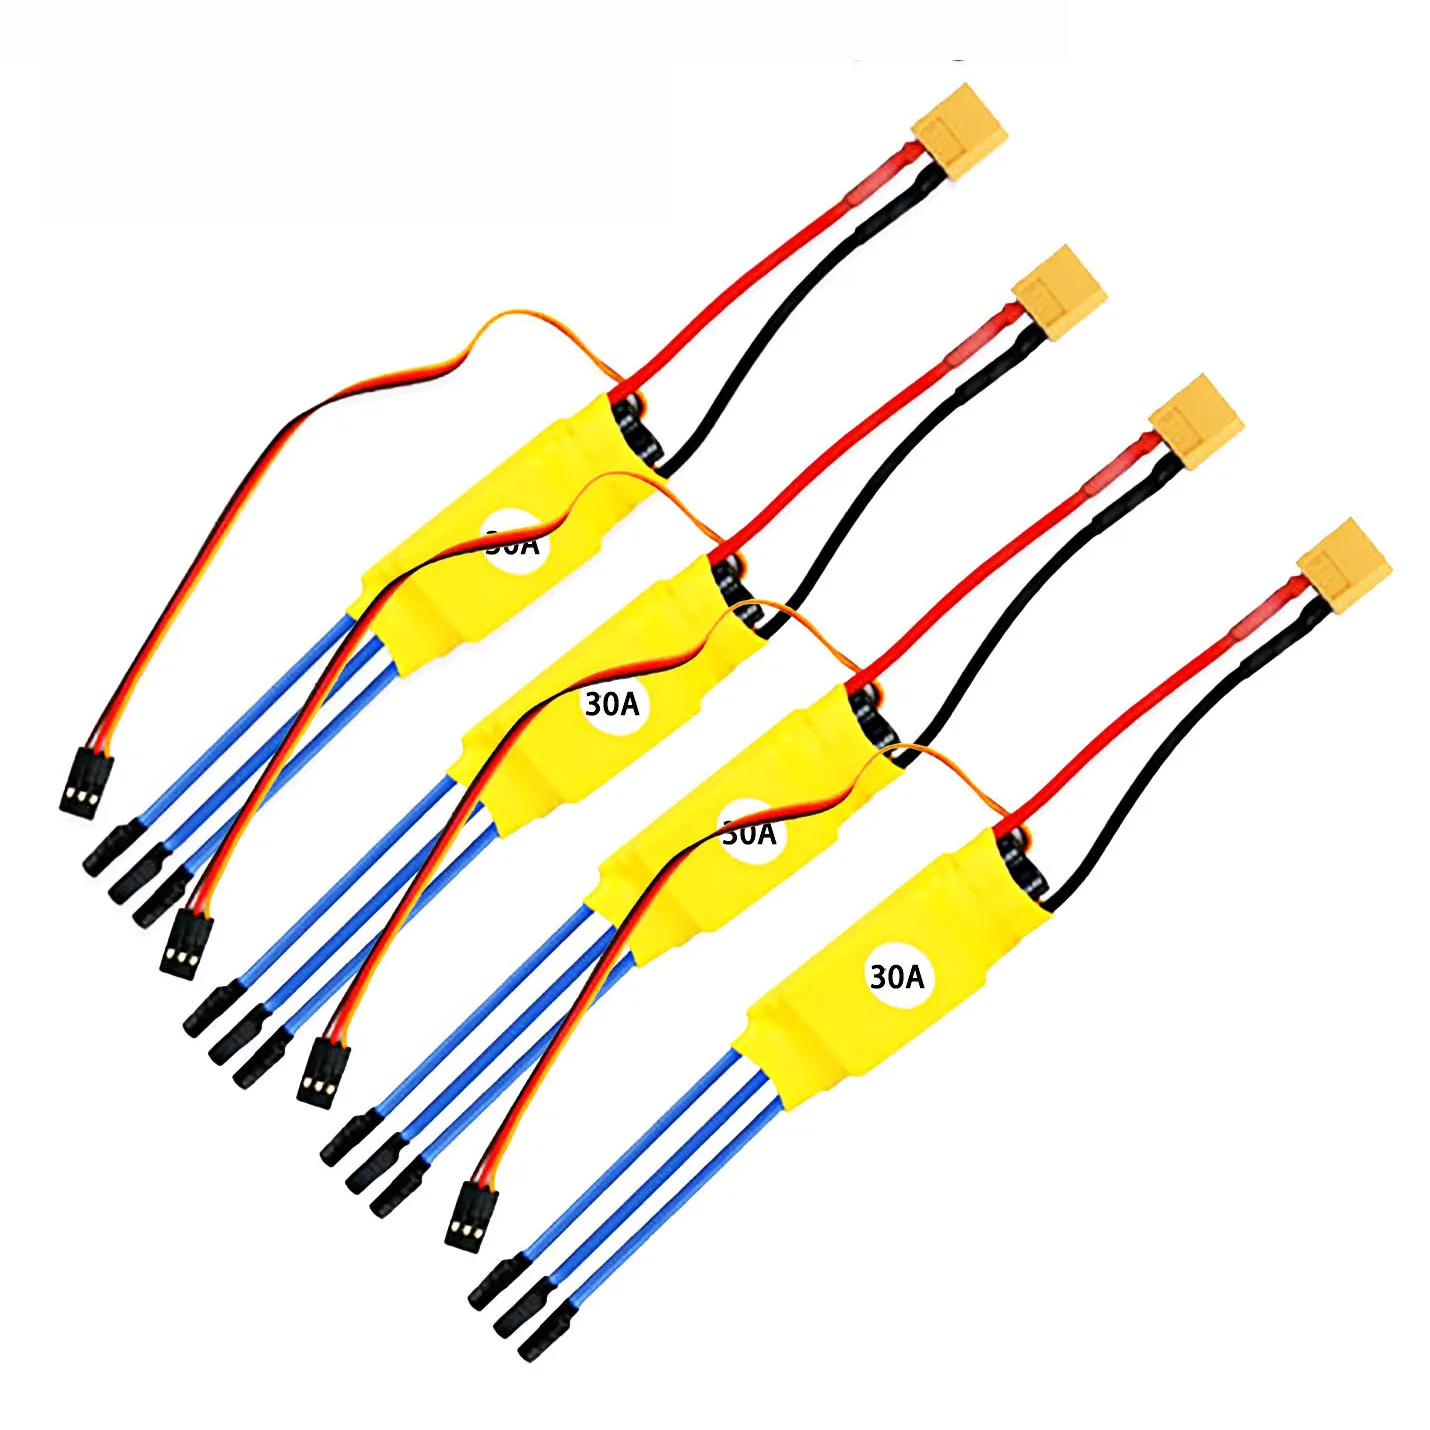 4PCS/lot XXD HW 30A/40A ESC Brushless Motor Speed Controller RC BEC T-rex  Helicopter Boat for F450 F550  Mini Quadcopter Drone